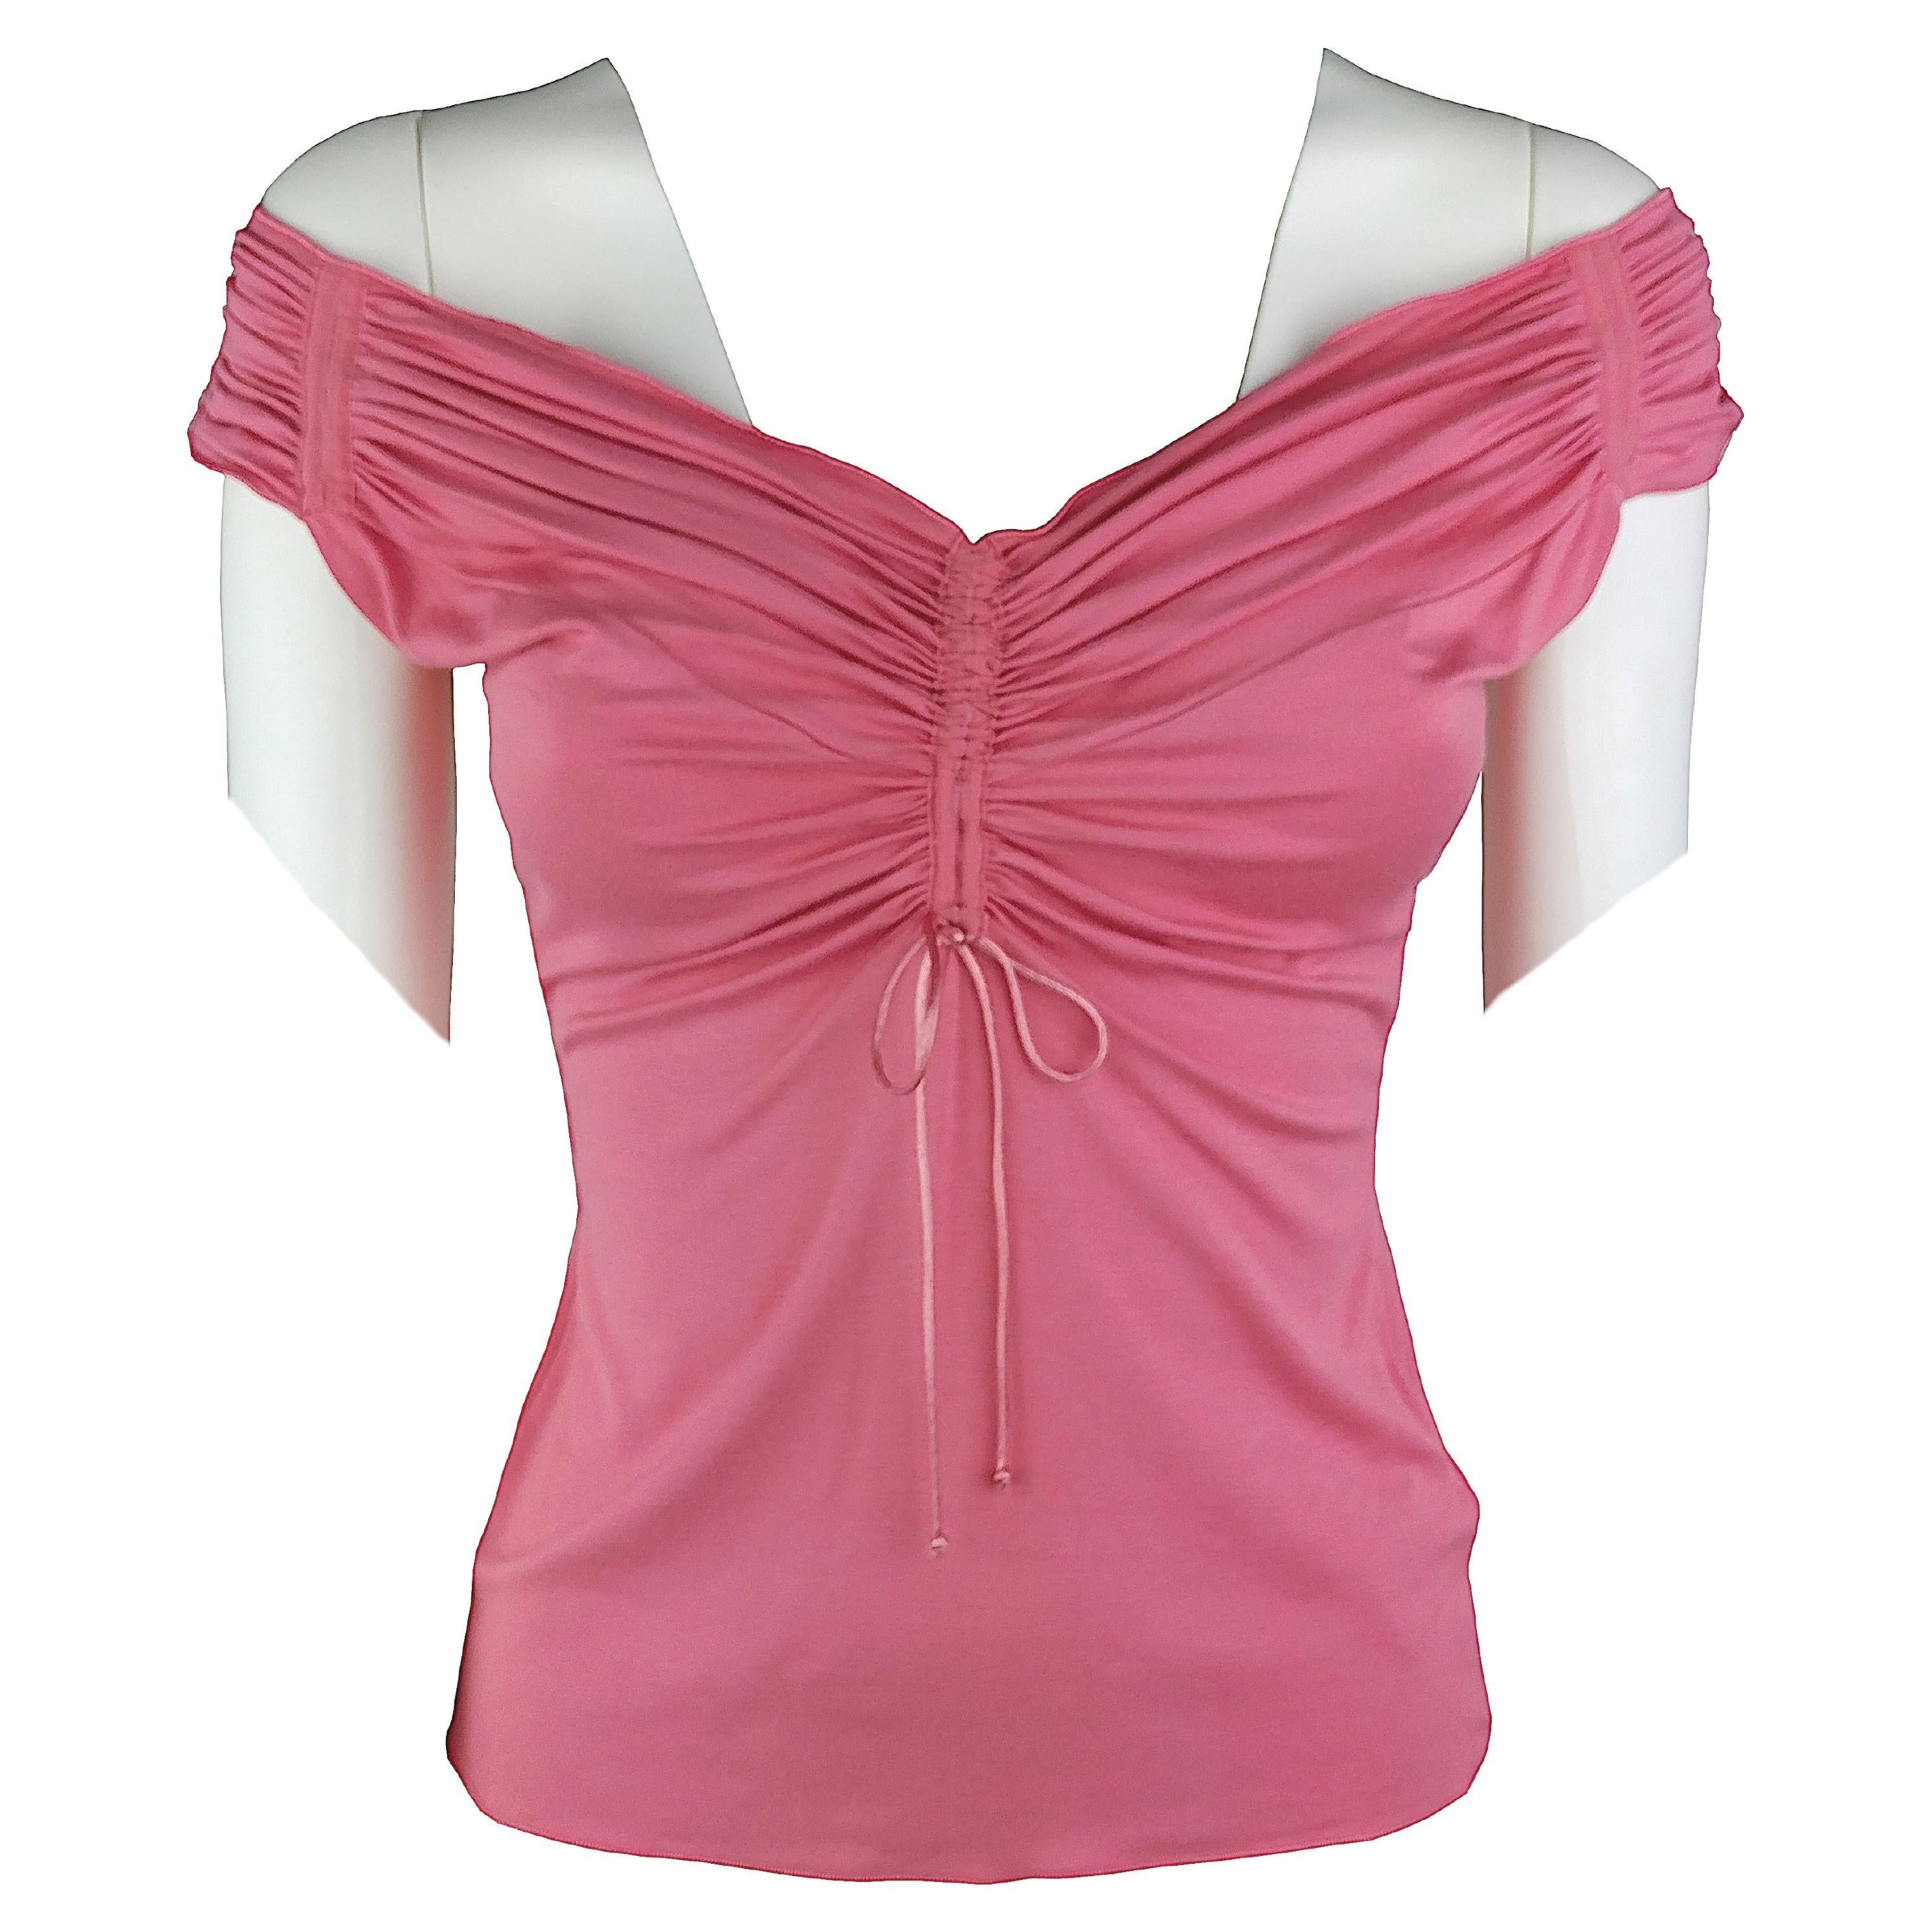 ARMANI – Sleeveless Pink Tank Top with Off-Shoulder Neckline  Size 8US 40EU